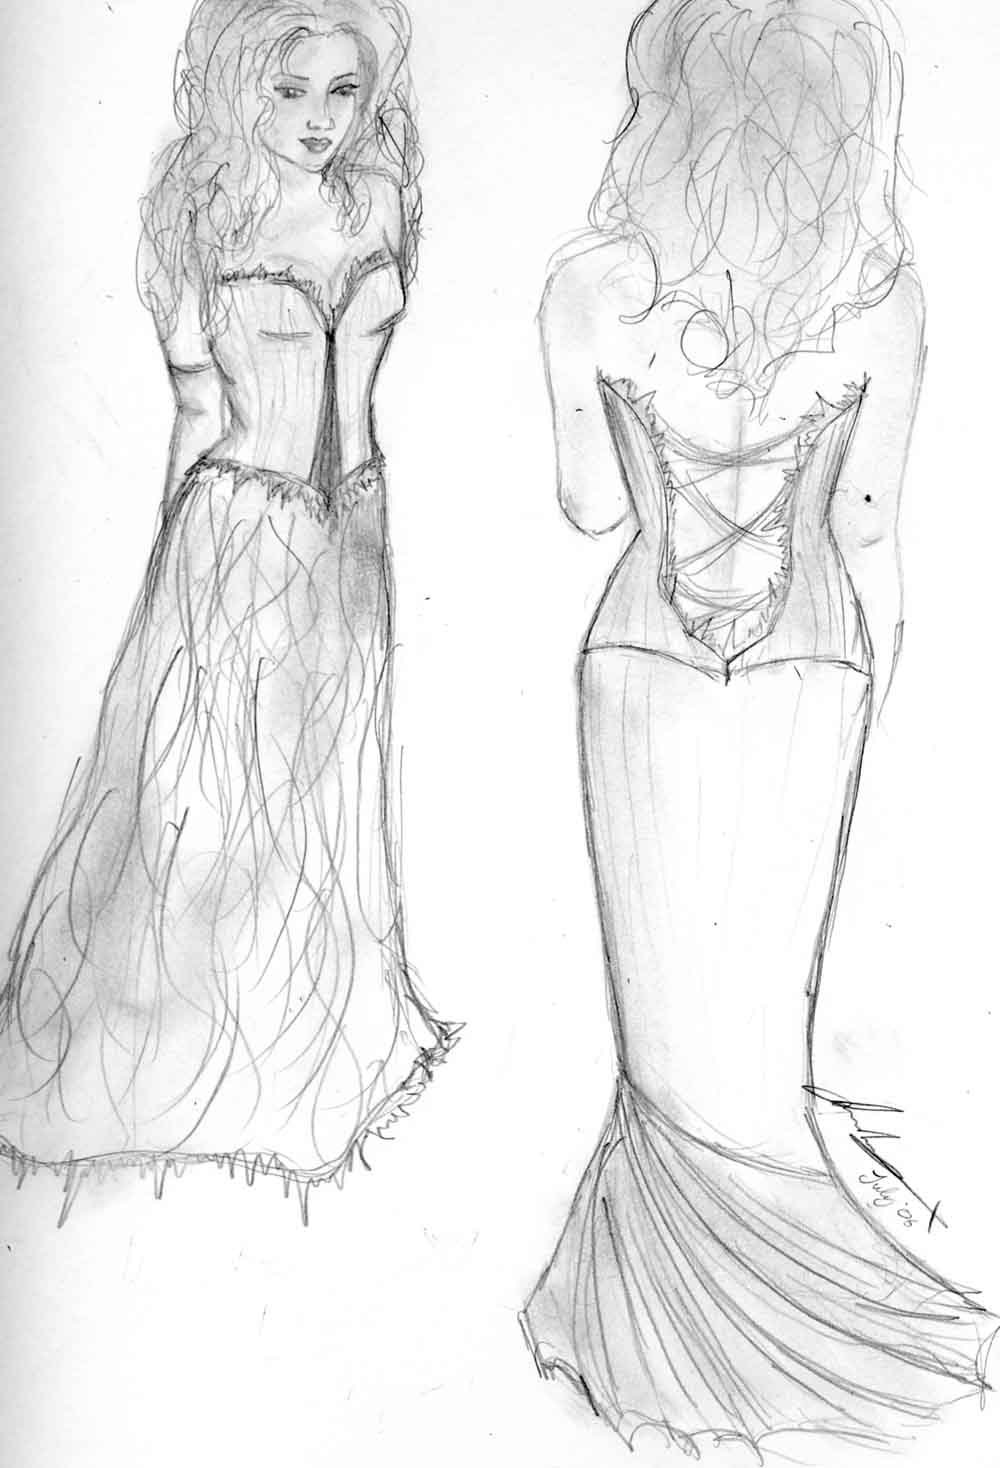 Evening gown by cyber_gurl23